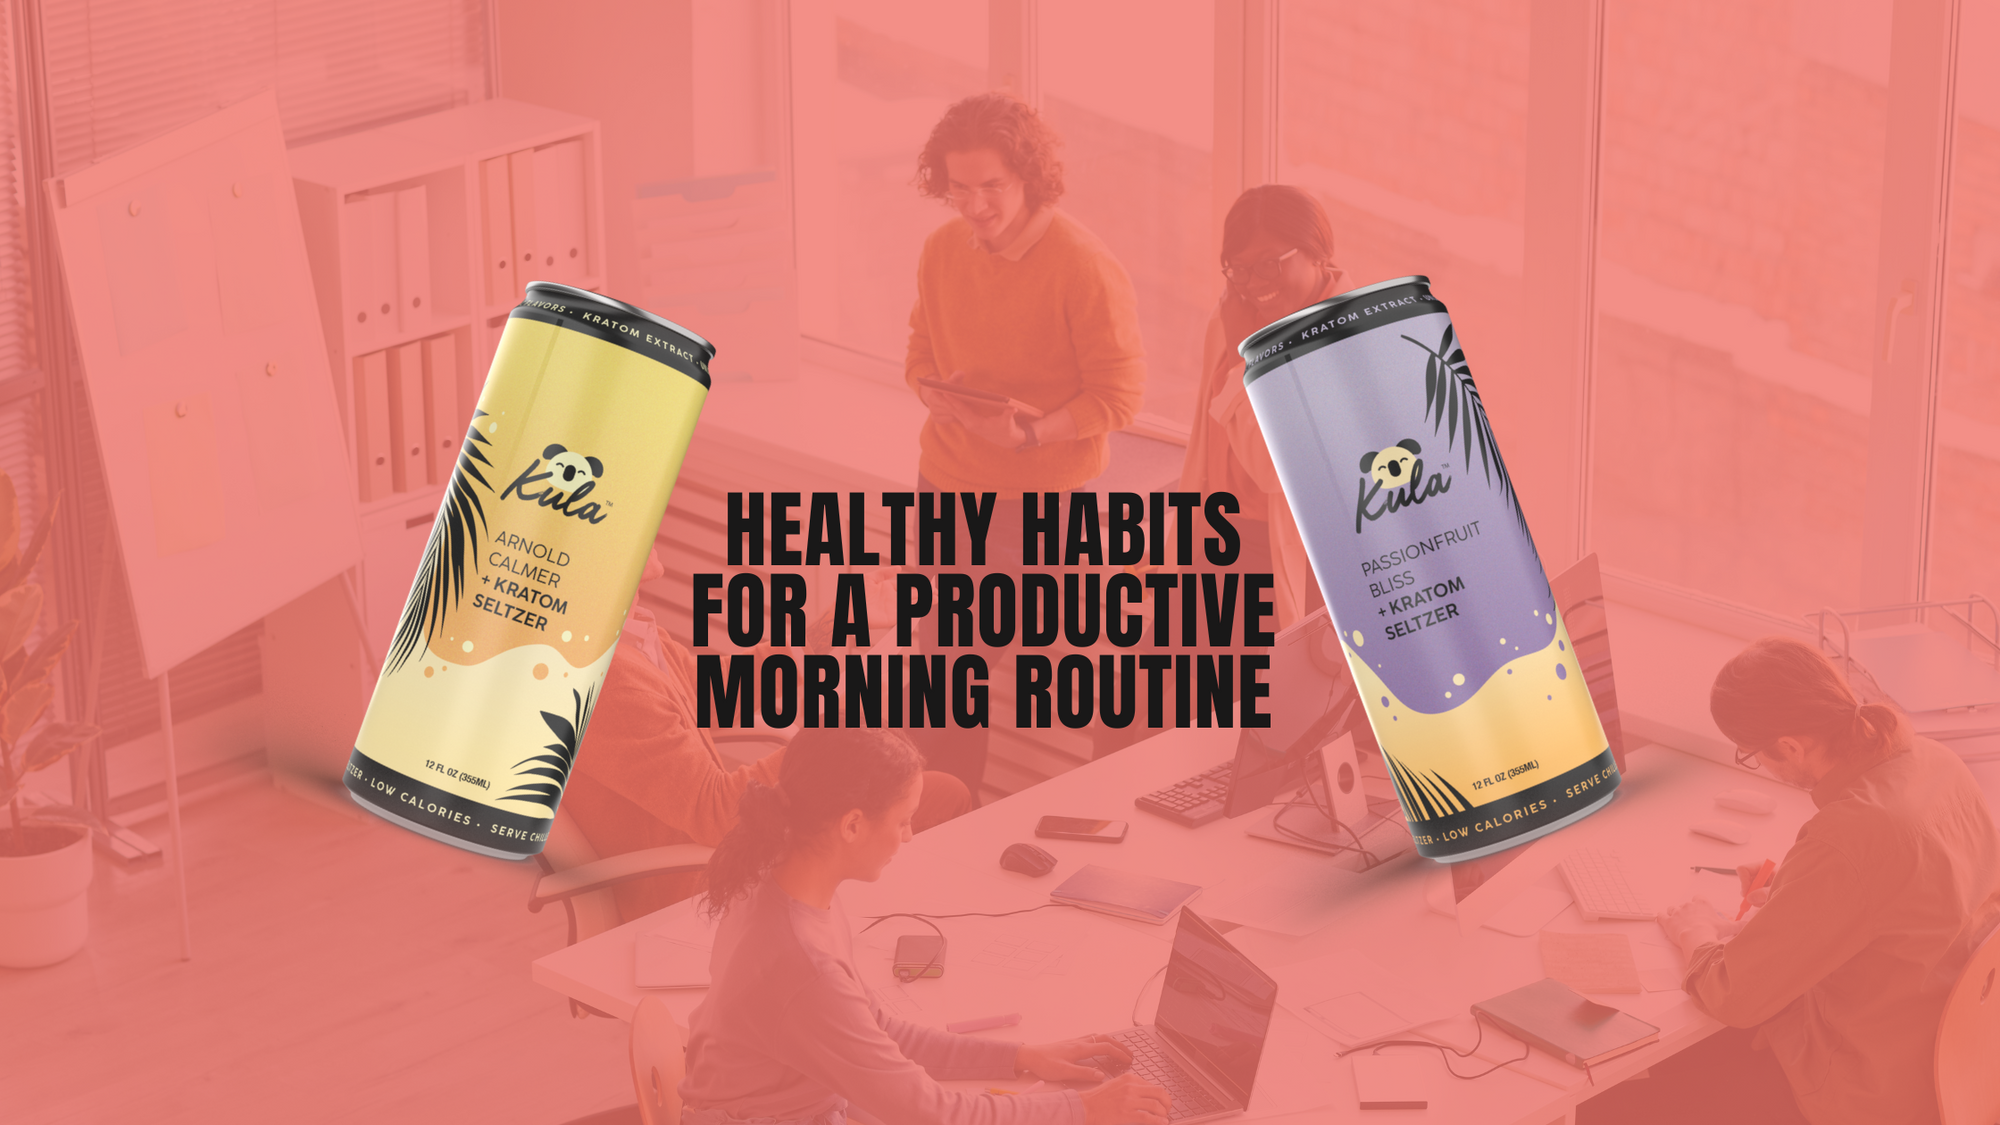 Healthy Habits for a Productive Morning Routine